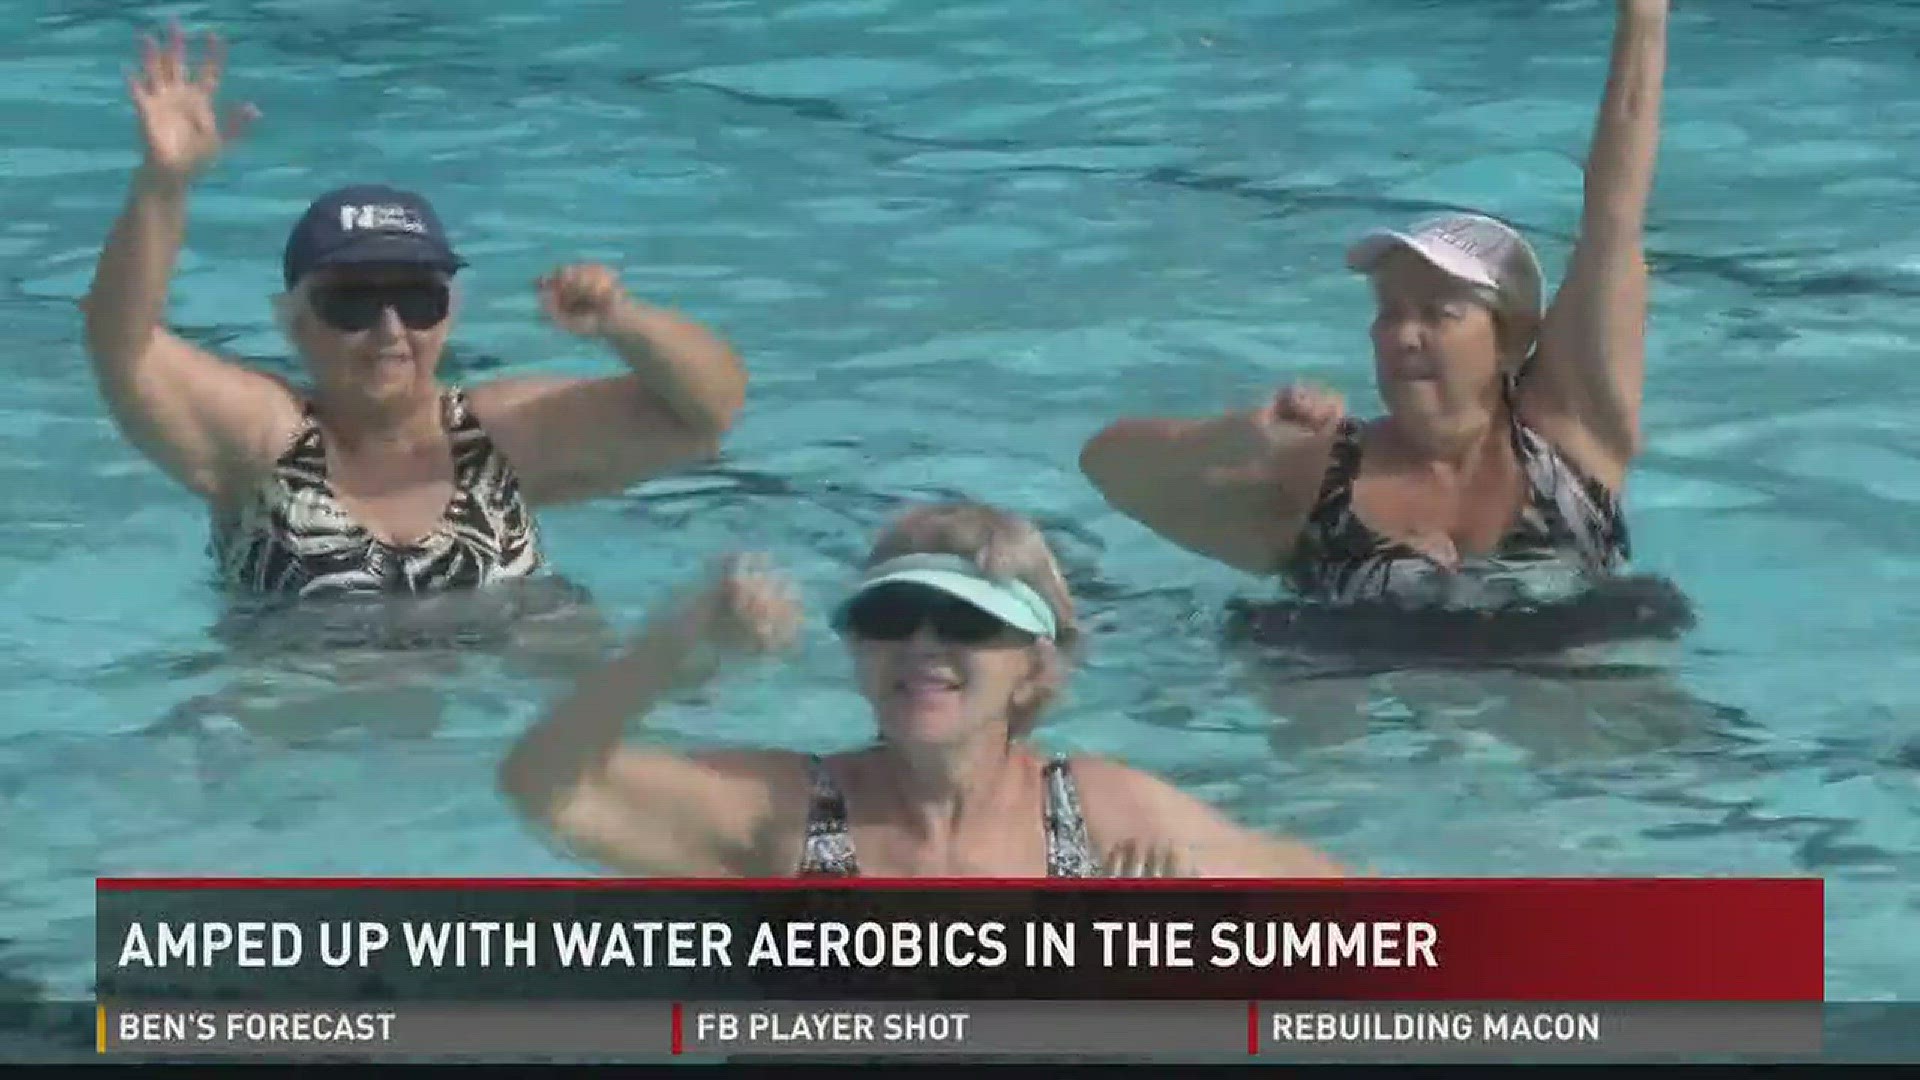 Amped Up: Water aerobics in the summer